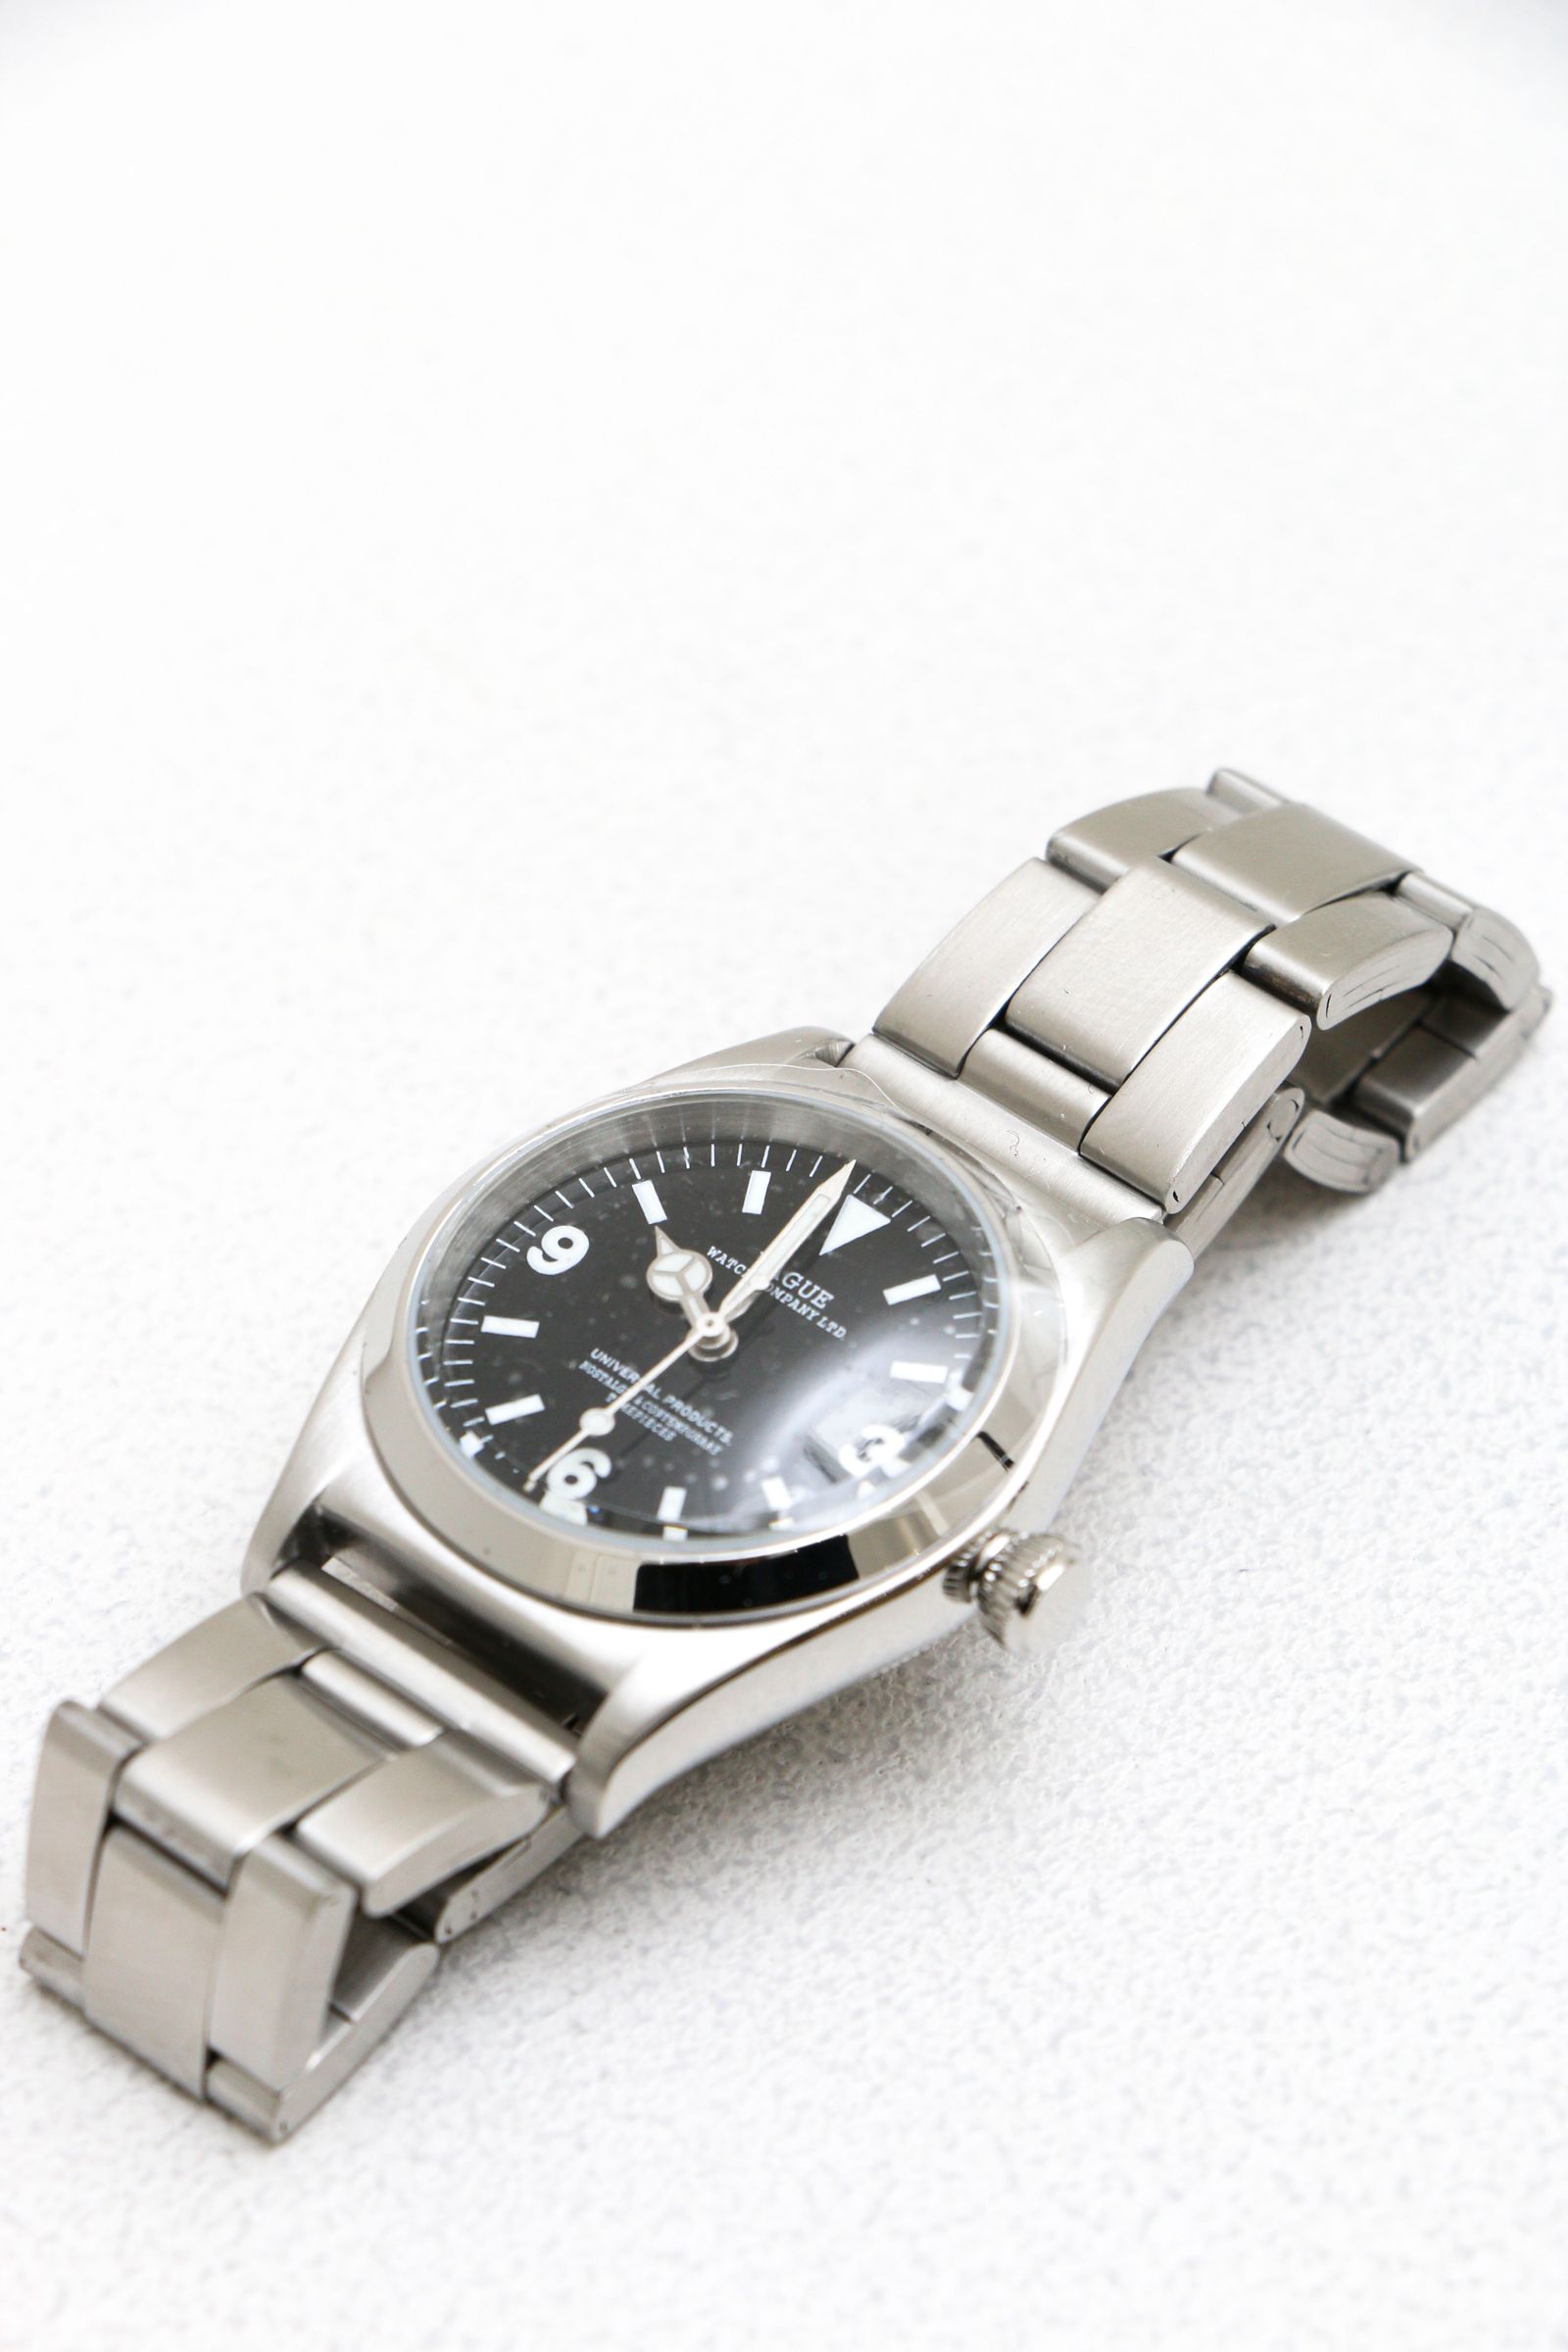 UNIVERSAL PRODUCTS - BB EX1 -STAINLESS-(VAGUE WATCH)SILVER | koko